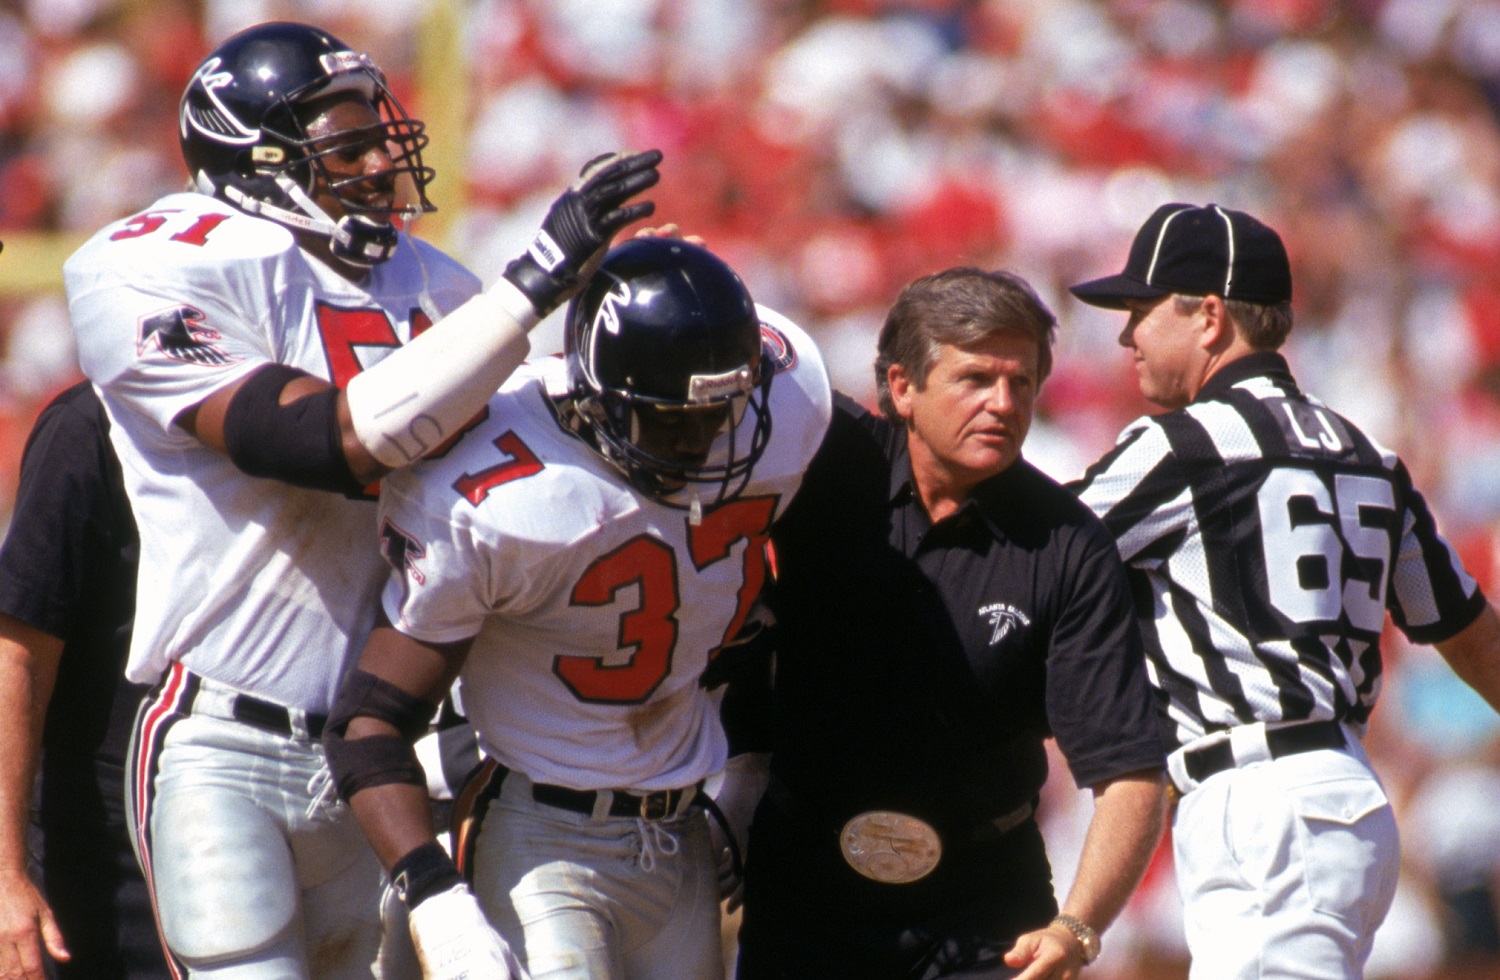 Cornerback Elbert Shelley gets help off the field from coach Jerry Glanville during a game against the San Francisco 49ers at Candlestick Park on Sept. 23, 1990.